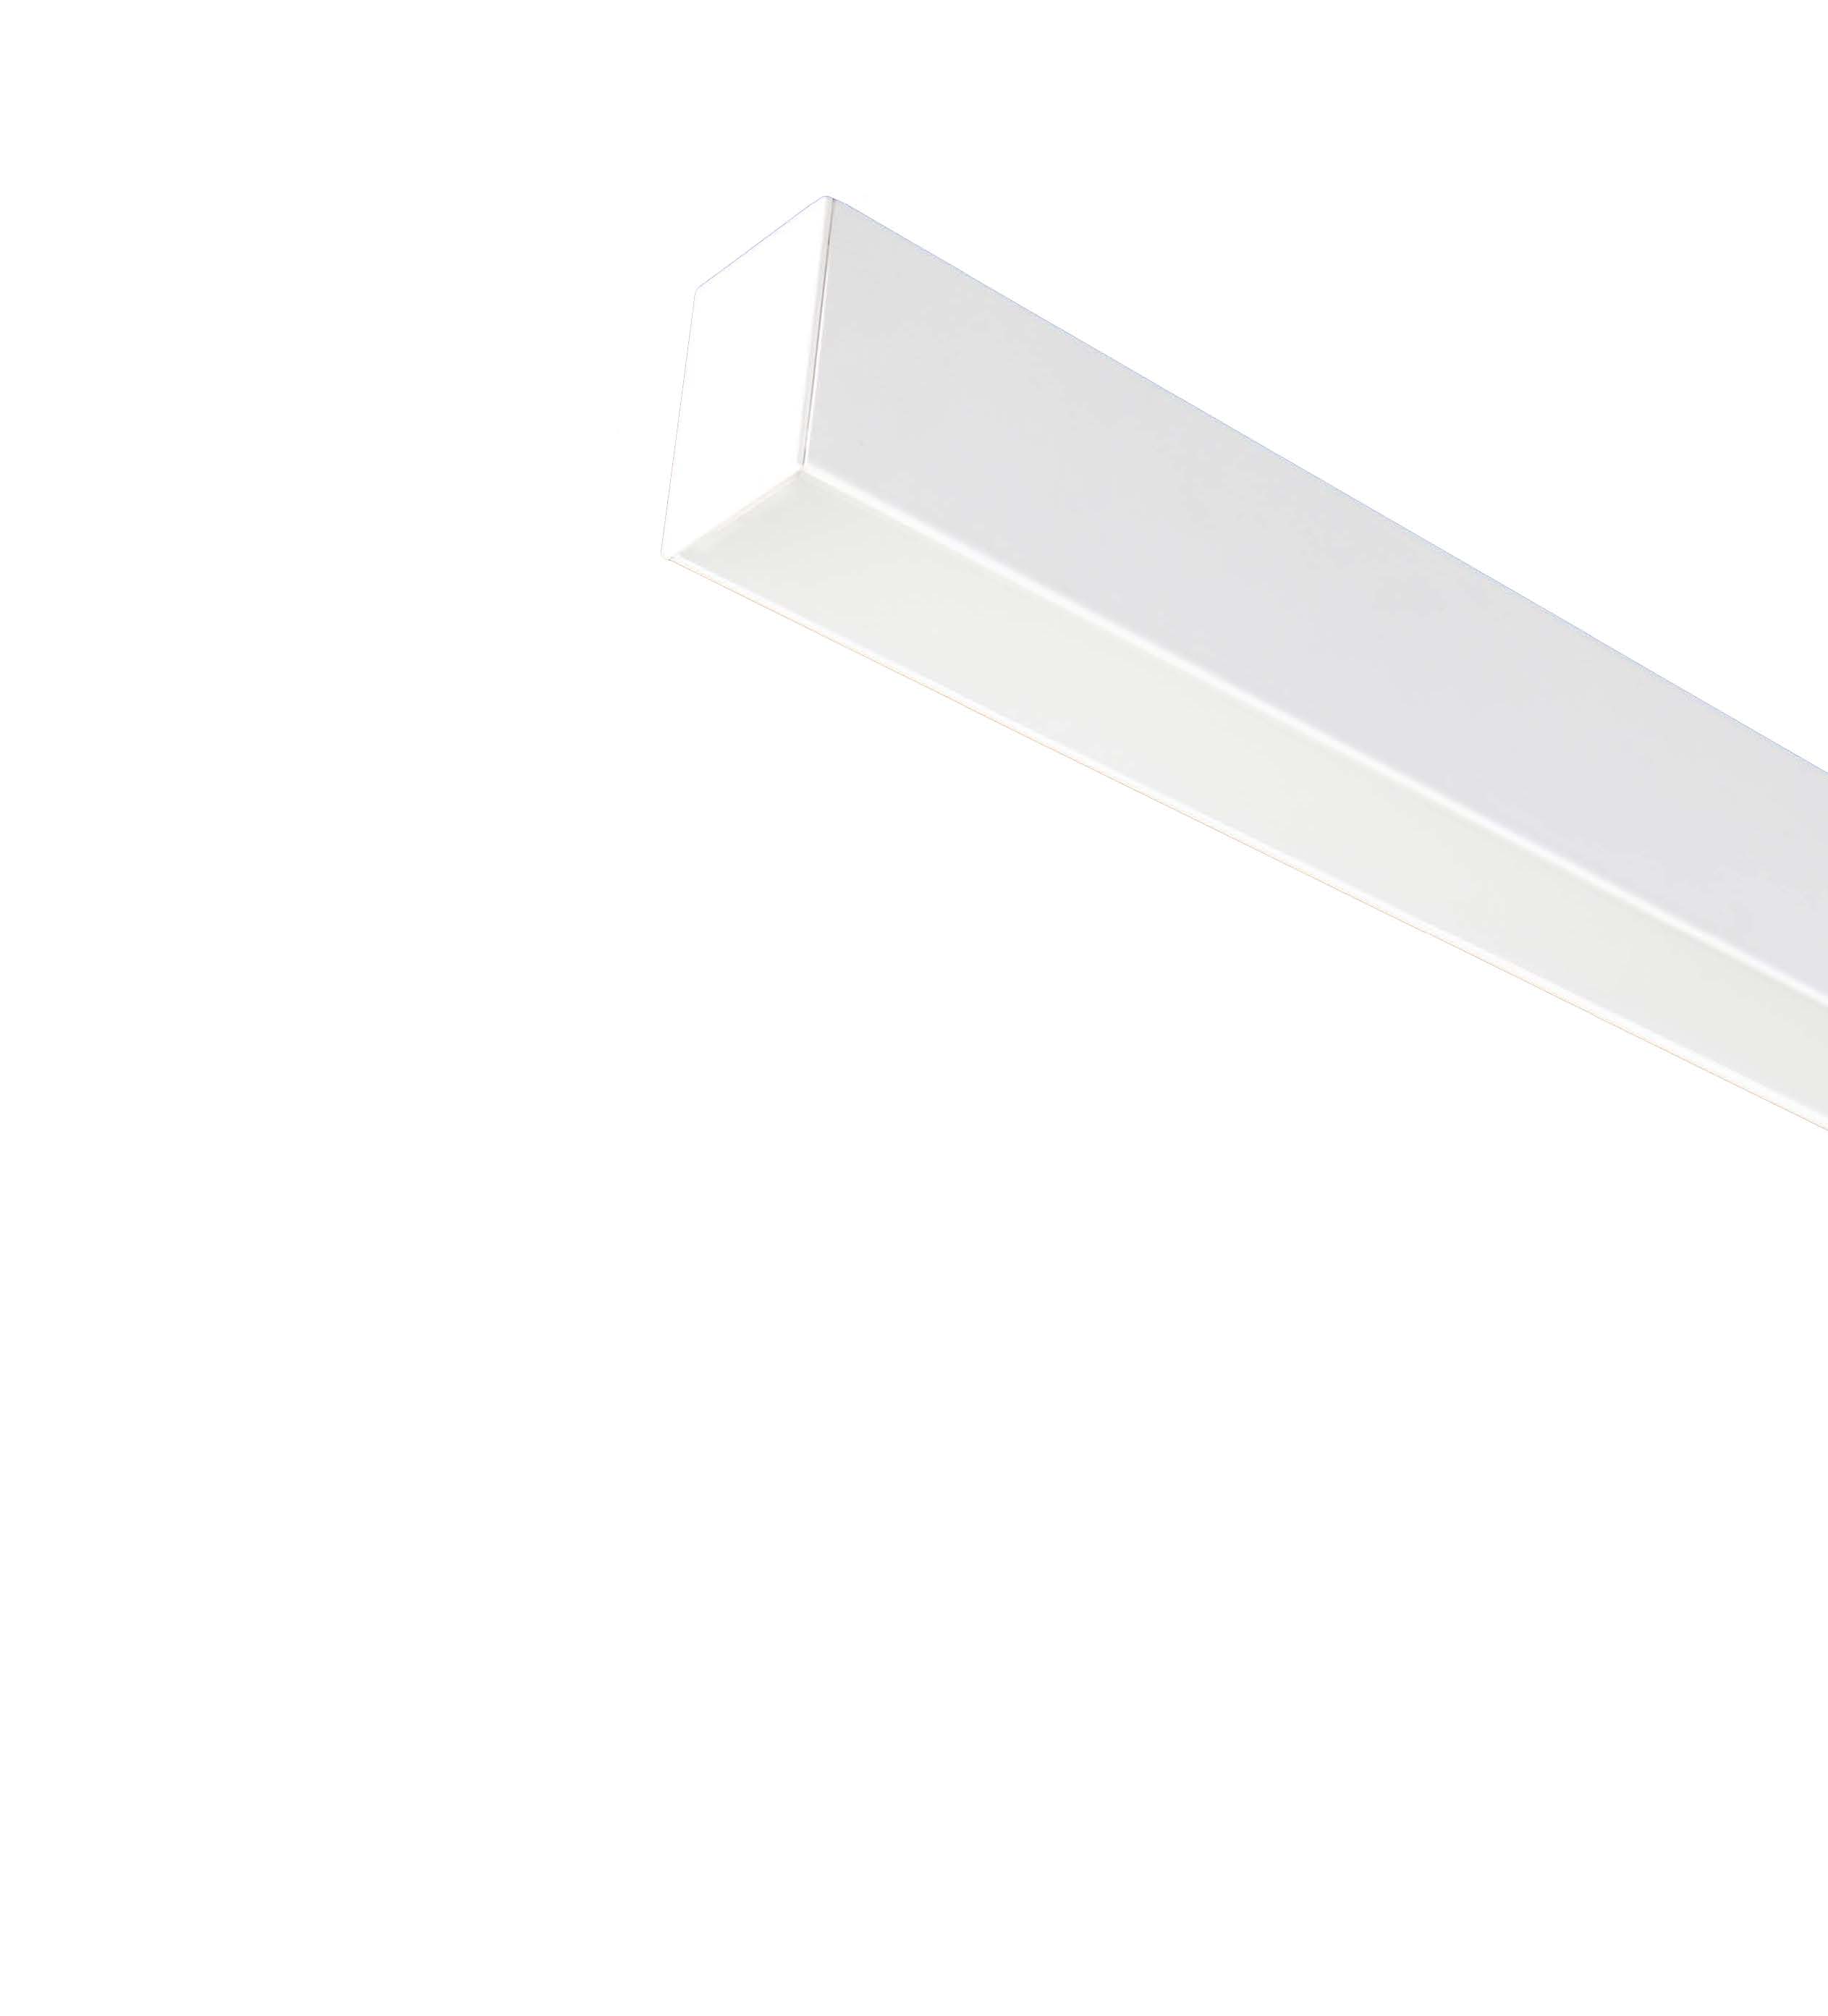 2.5” x 3.5” LED Linear Pendant Direct or Indirect